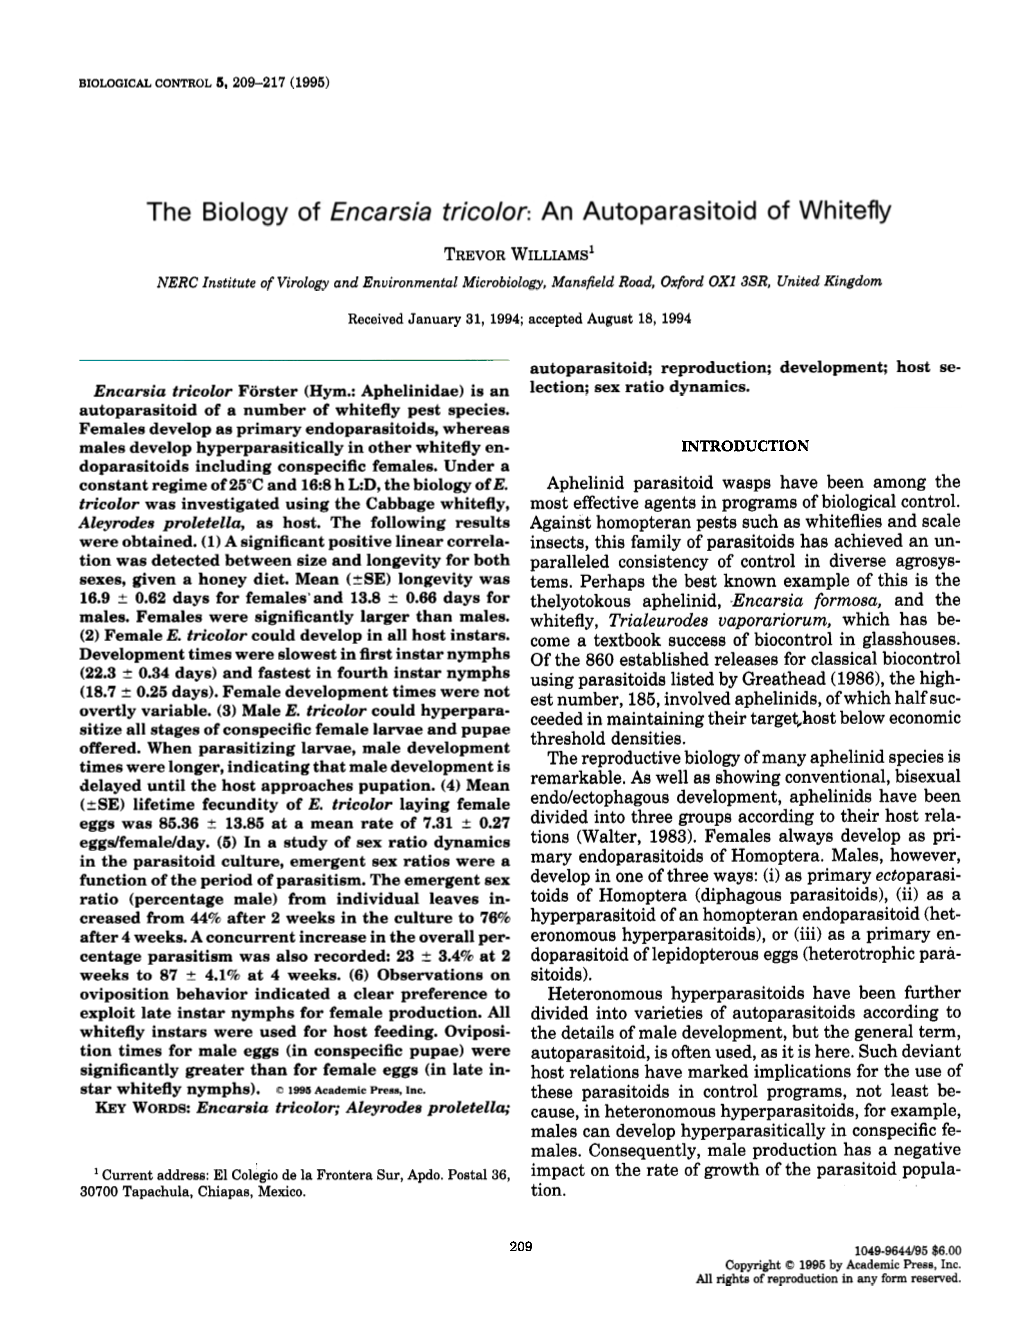 The Biology of Encarsia Tricolor: an Autoparasitoid of Whitefly